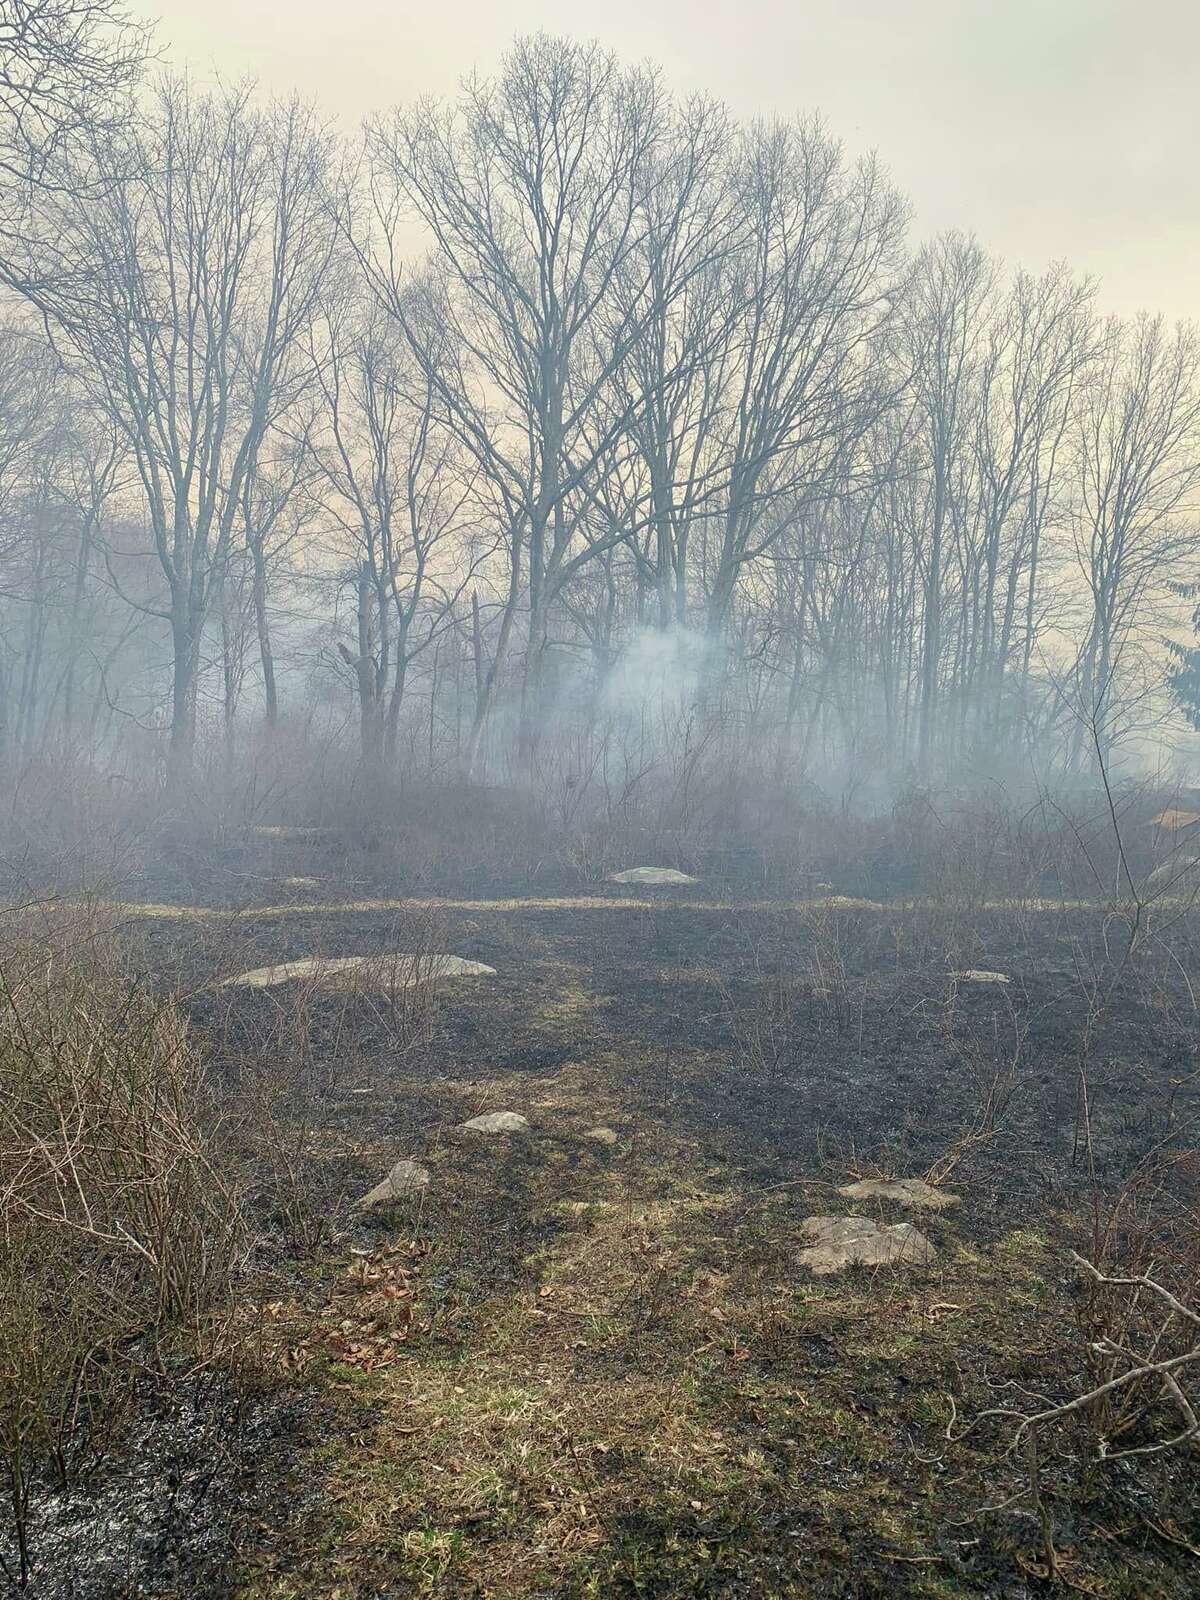 The Ledyard Fire Company is fighting a 2-acre brush fire on Shewville Road.